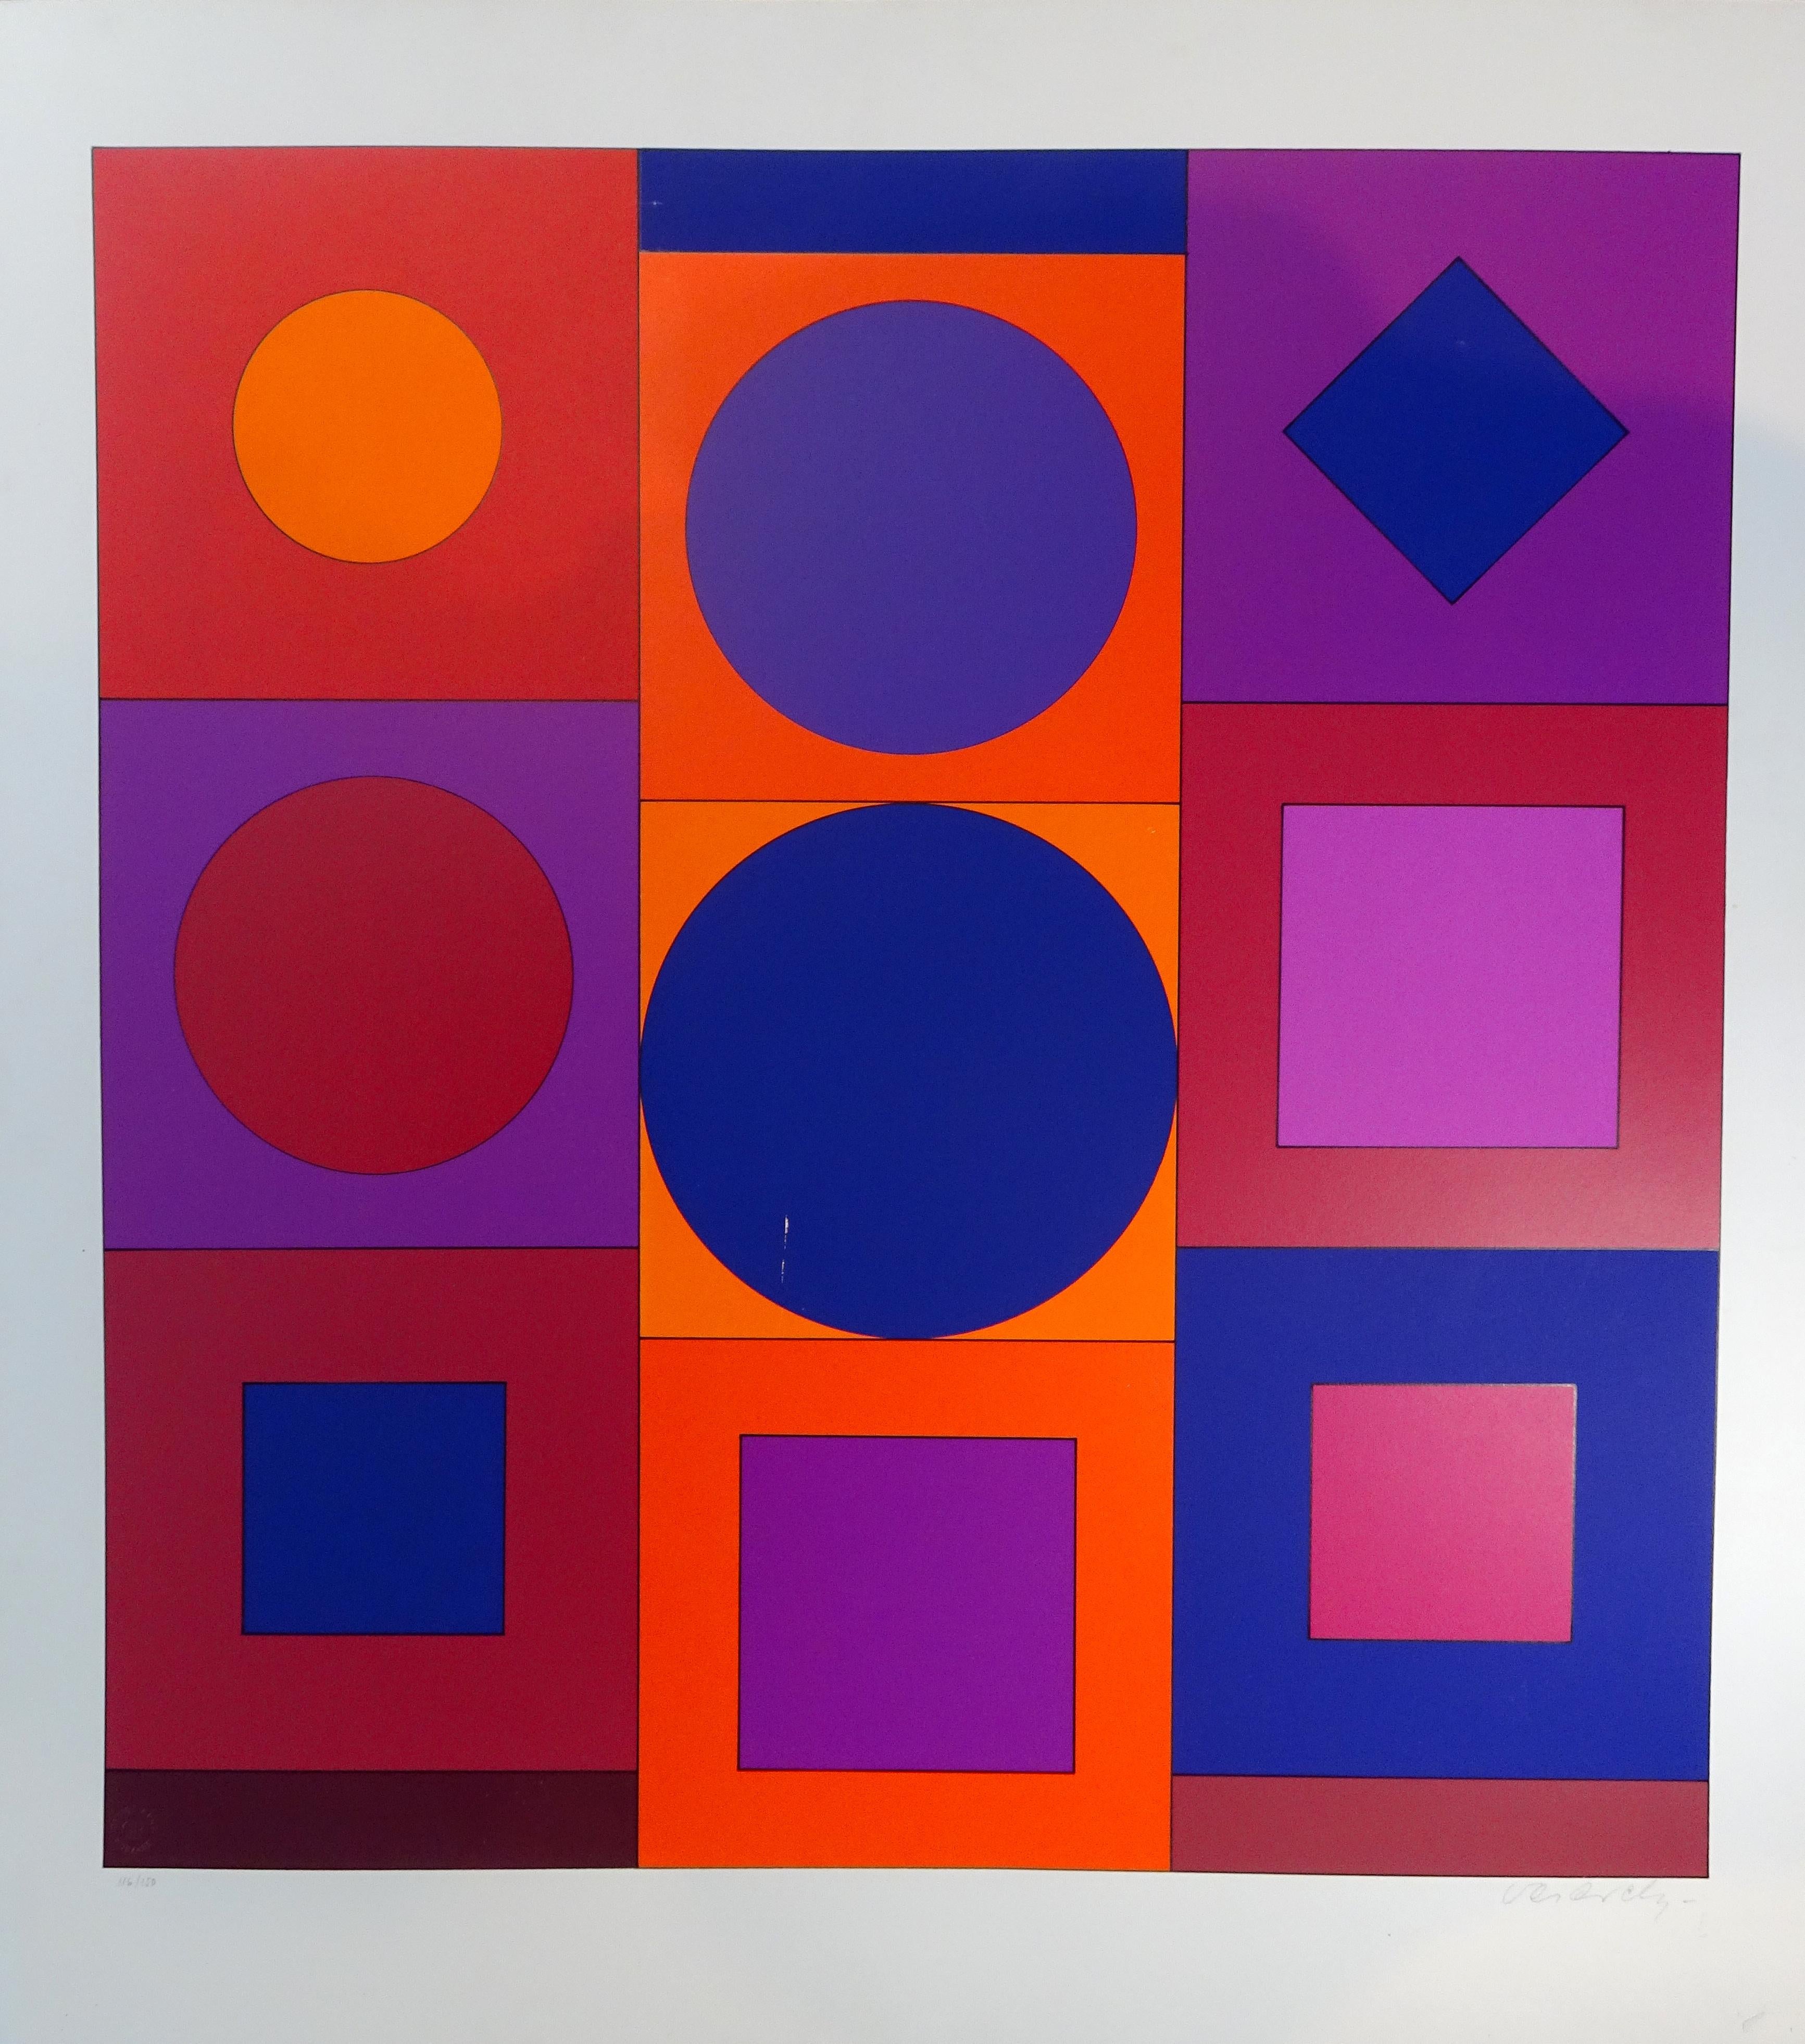 Granat is an original mesmerizing serigraph realized in 1967 by Victor Vasarely.
Hand-signed on the lower right in pencil. Numbered on the lower left. Edition 116/150. Original dry stamp on lower left.
The artwork is part of the portfolio